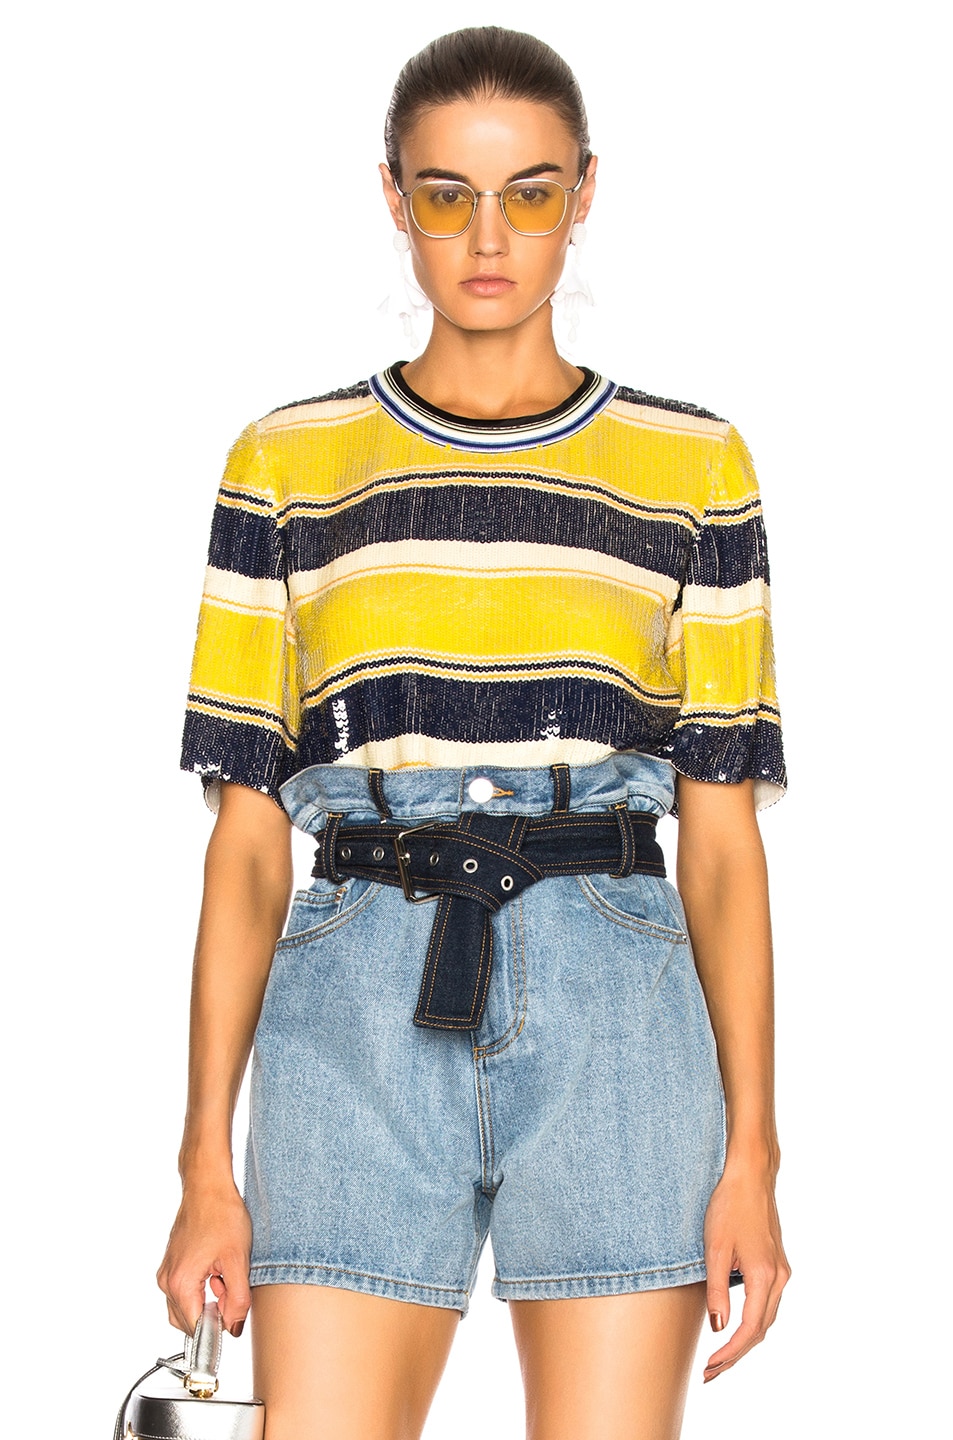 3.1 phillip lim Striped Sequin Top in Chartreuse & Navy | FWRD